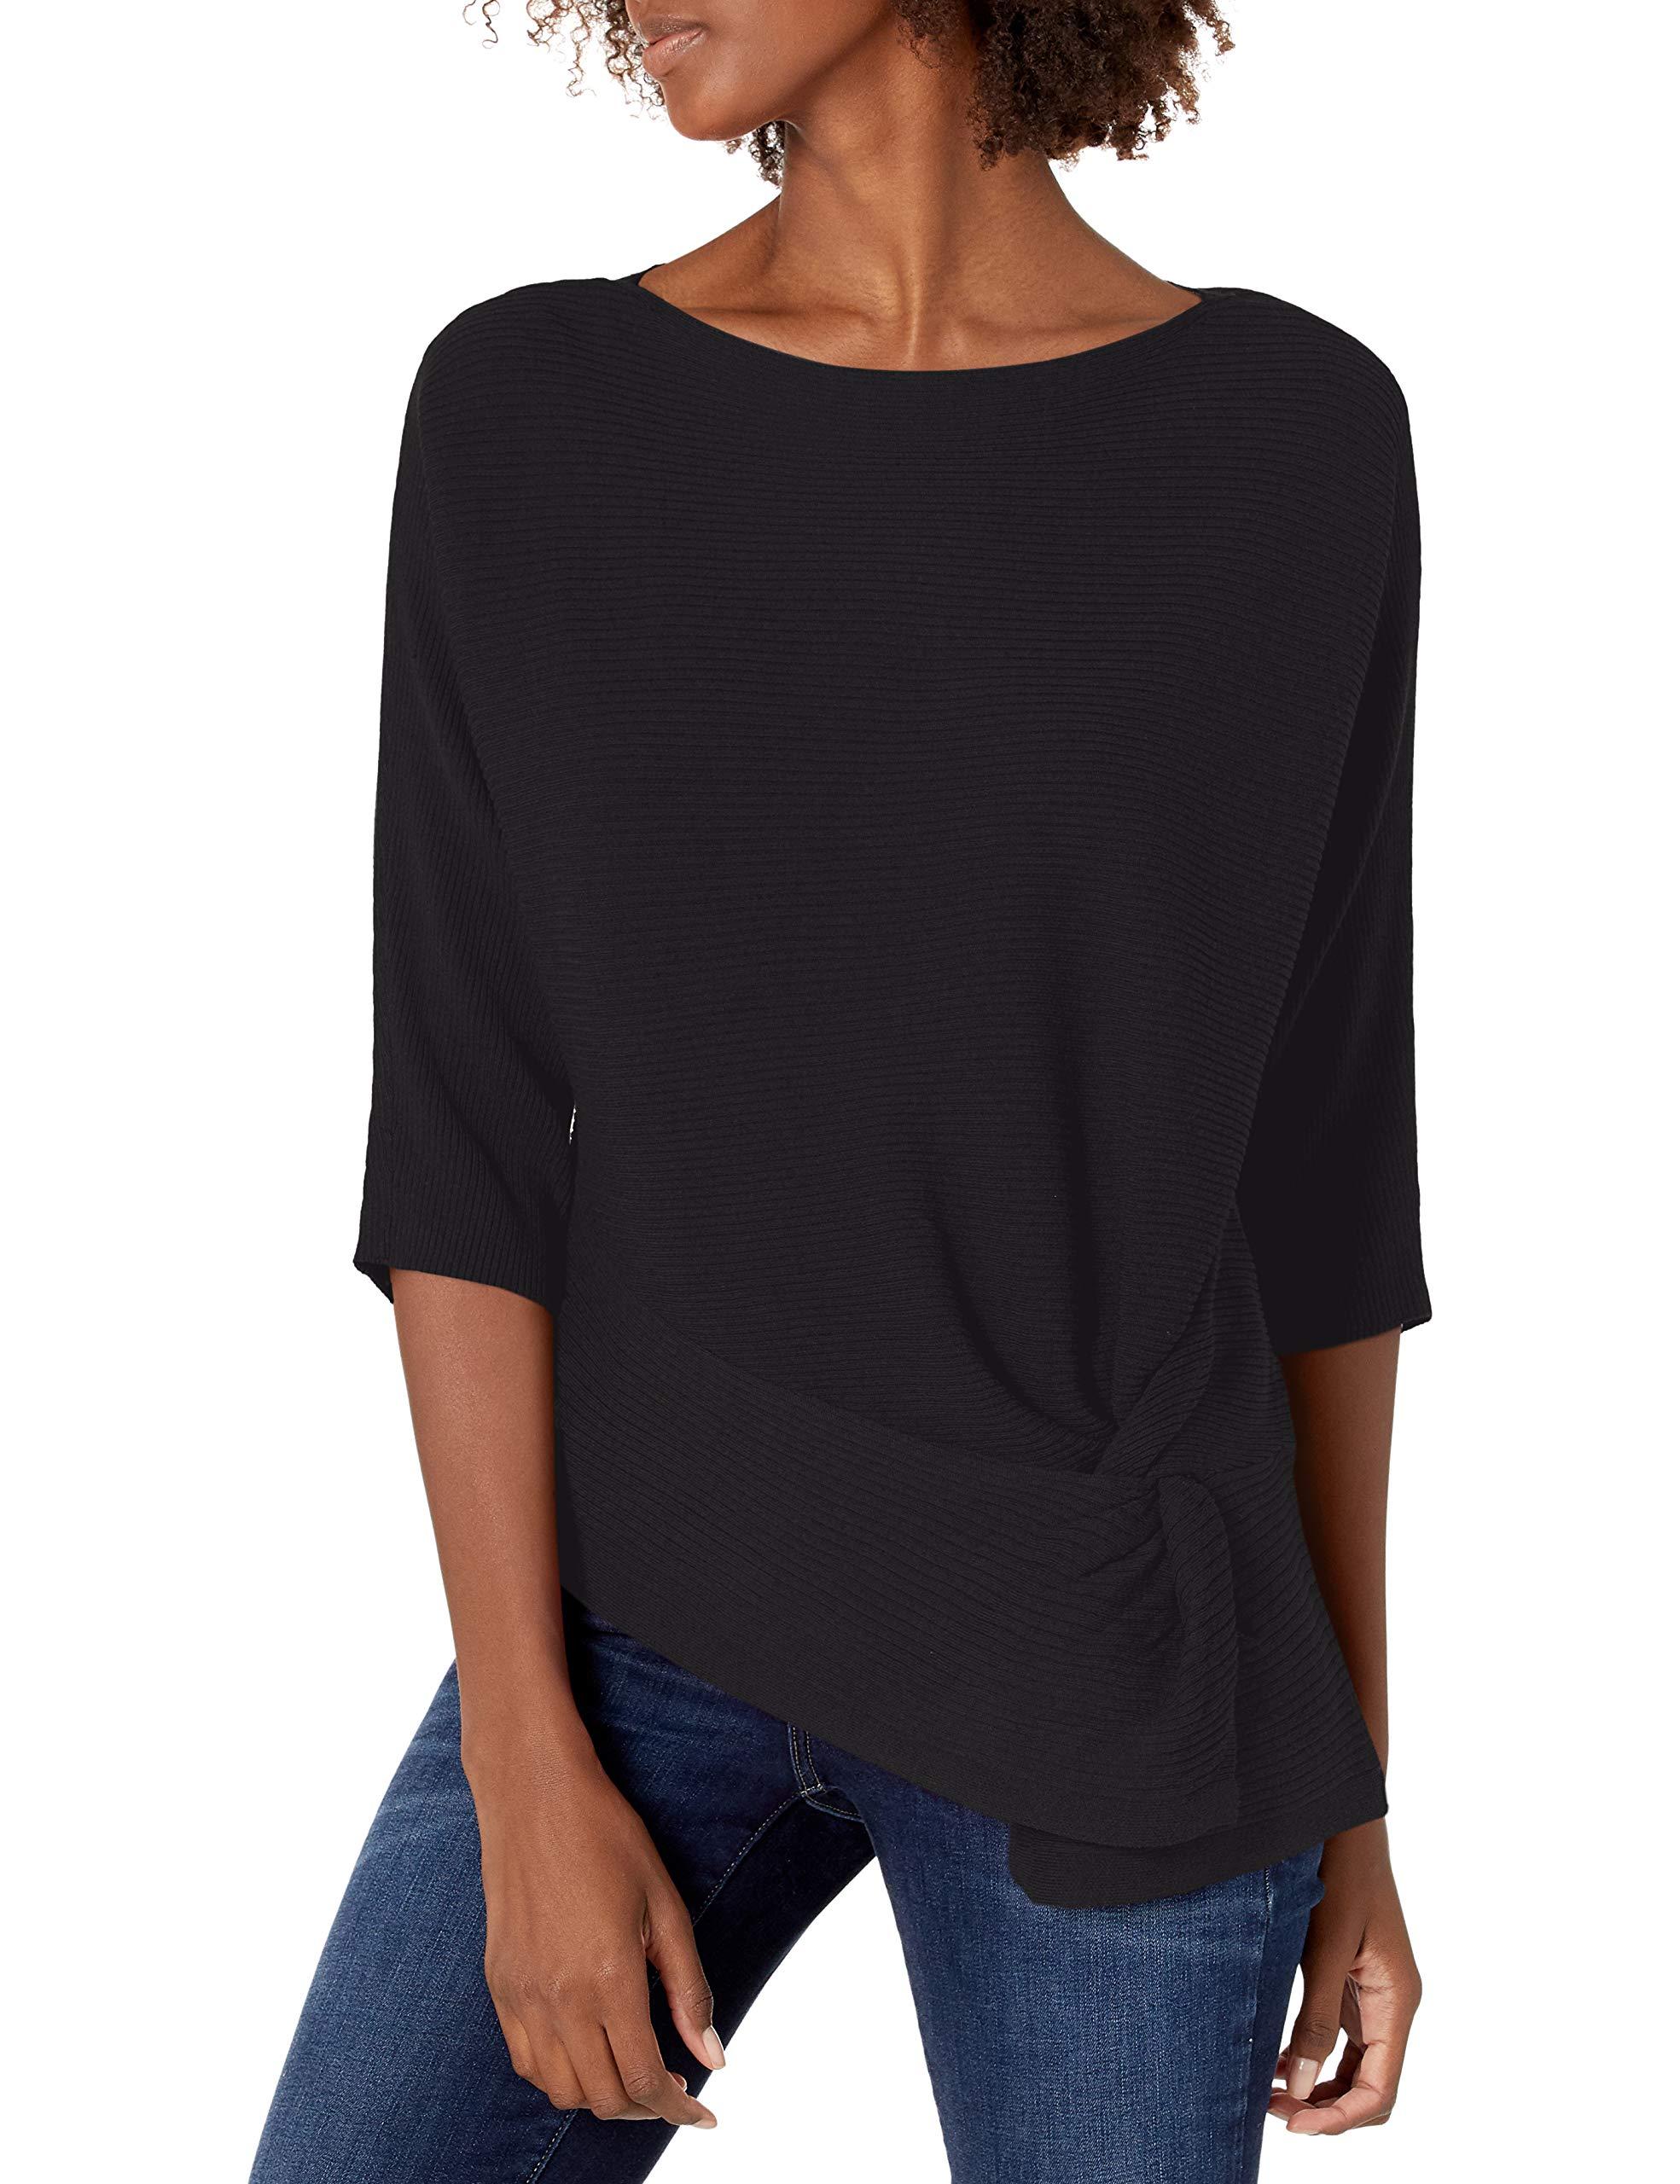 Vince Camuto Long Sleeve Sweater in Black - Lyst